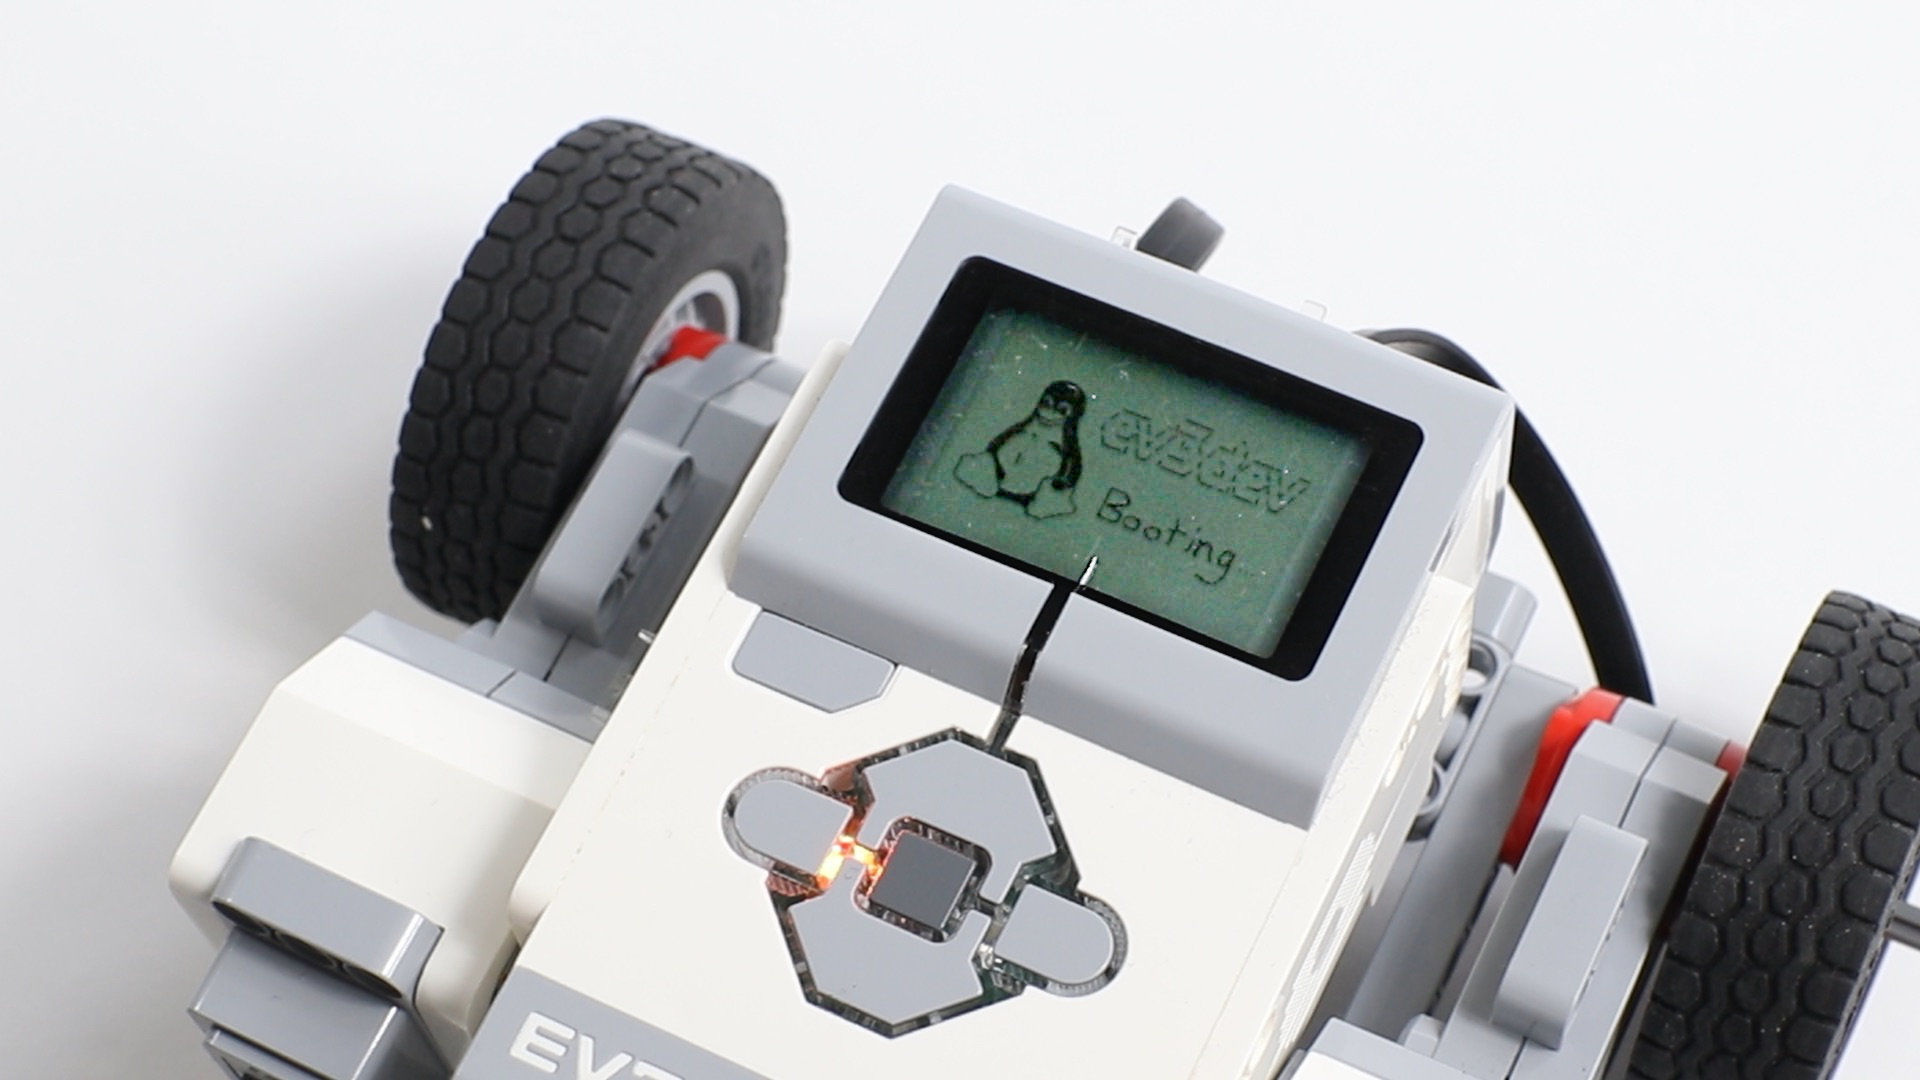 LEGO EV3 running Linux with Python and MicroPython